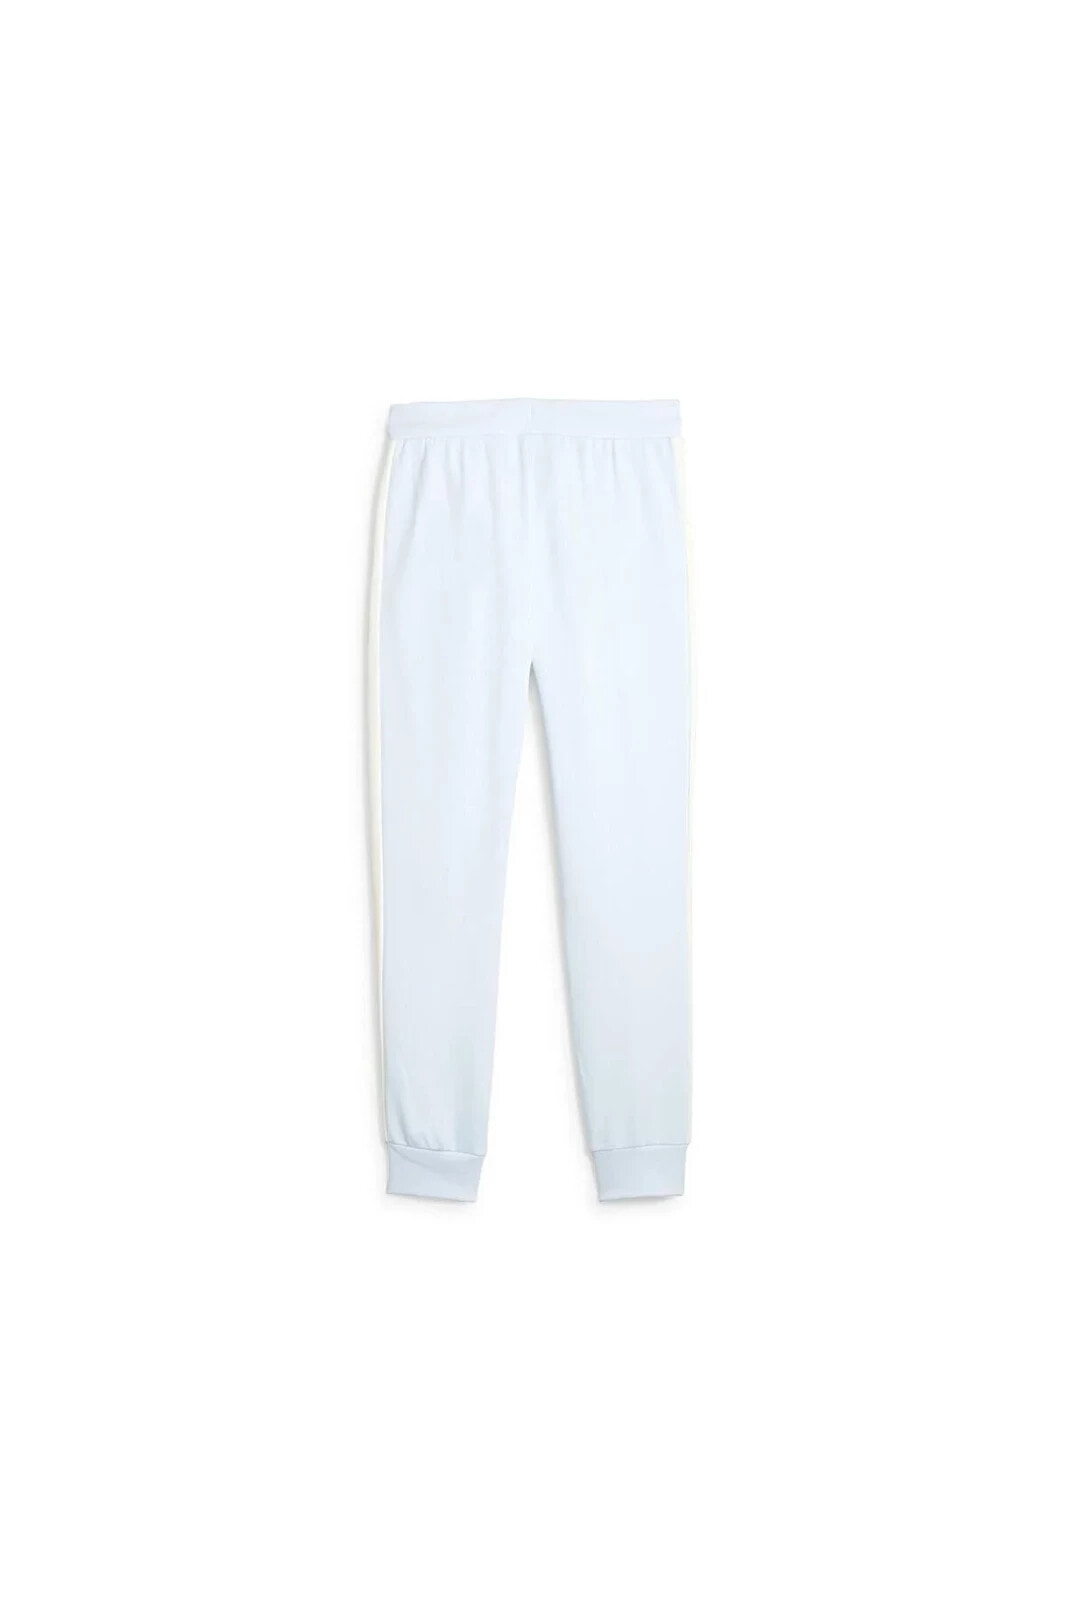 Iconic T7 Track Pants TR cl (s)